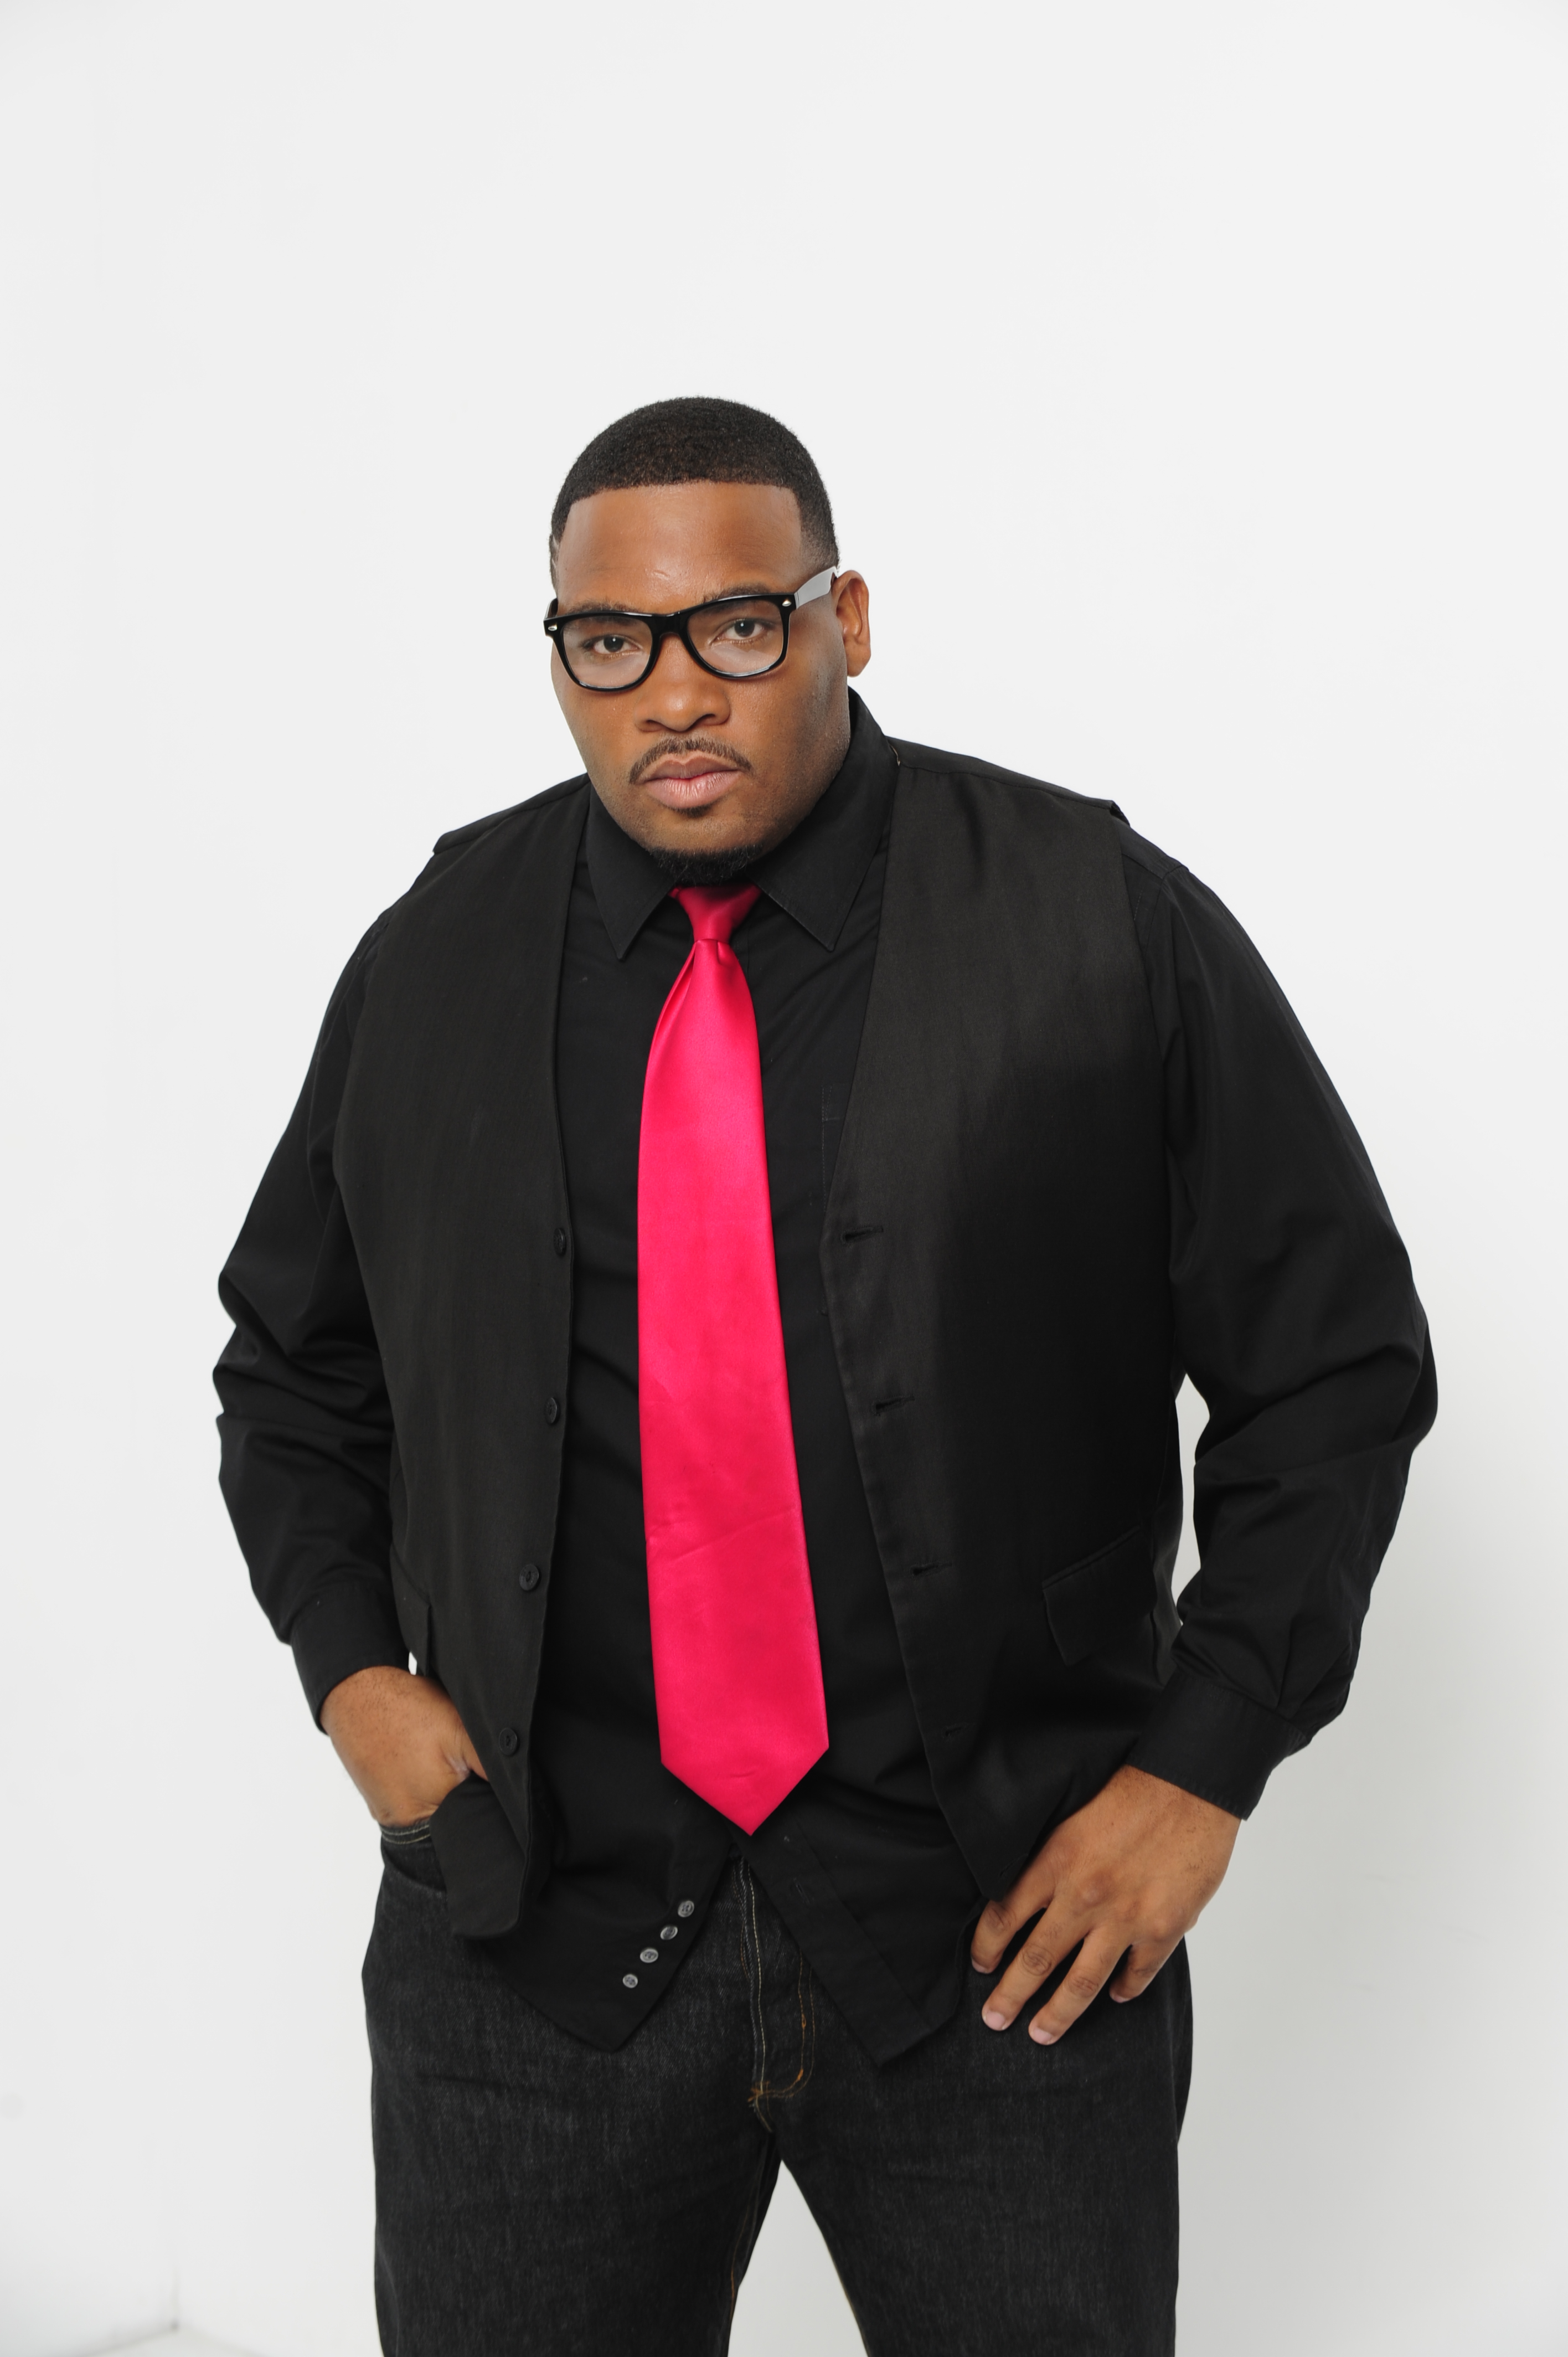 Actor Ronnell Price very first photoshoot 2013-11-24 09-26